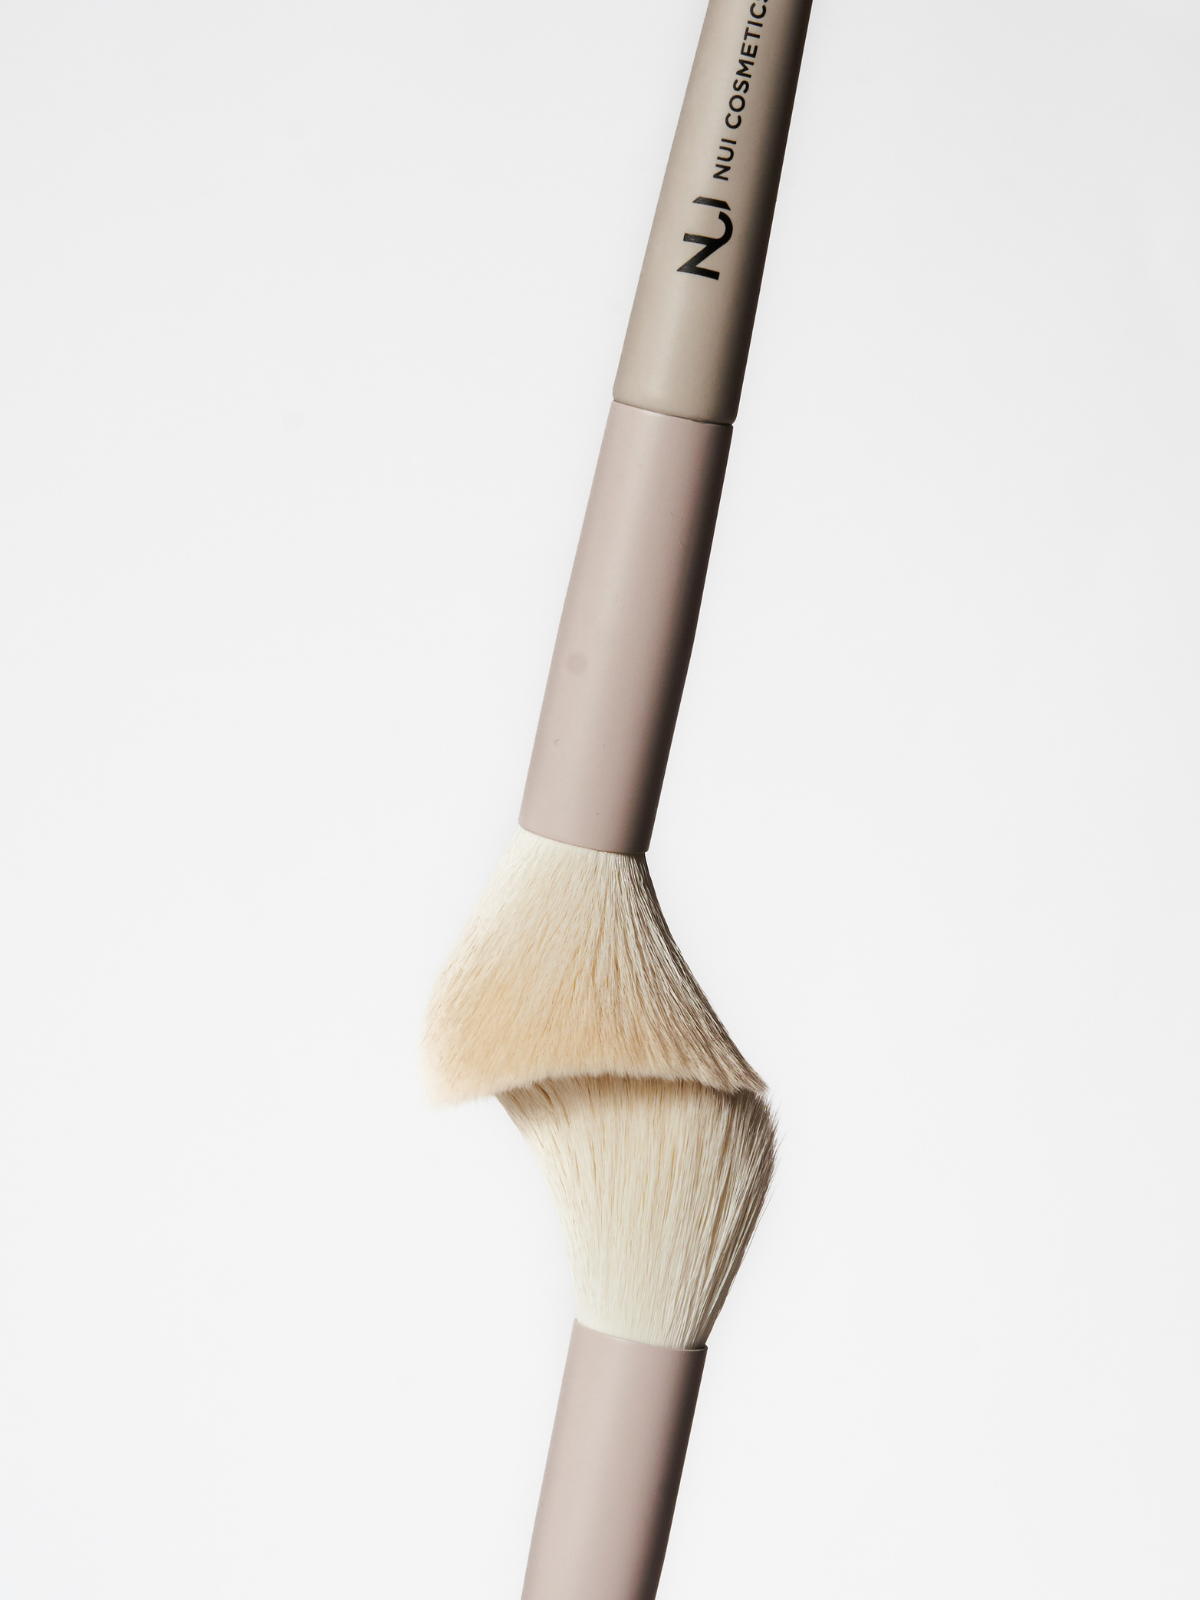 NUI All in One Starter Brush Set - Limited Edition